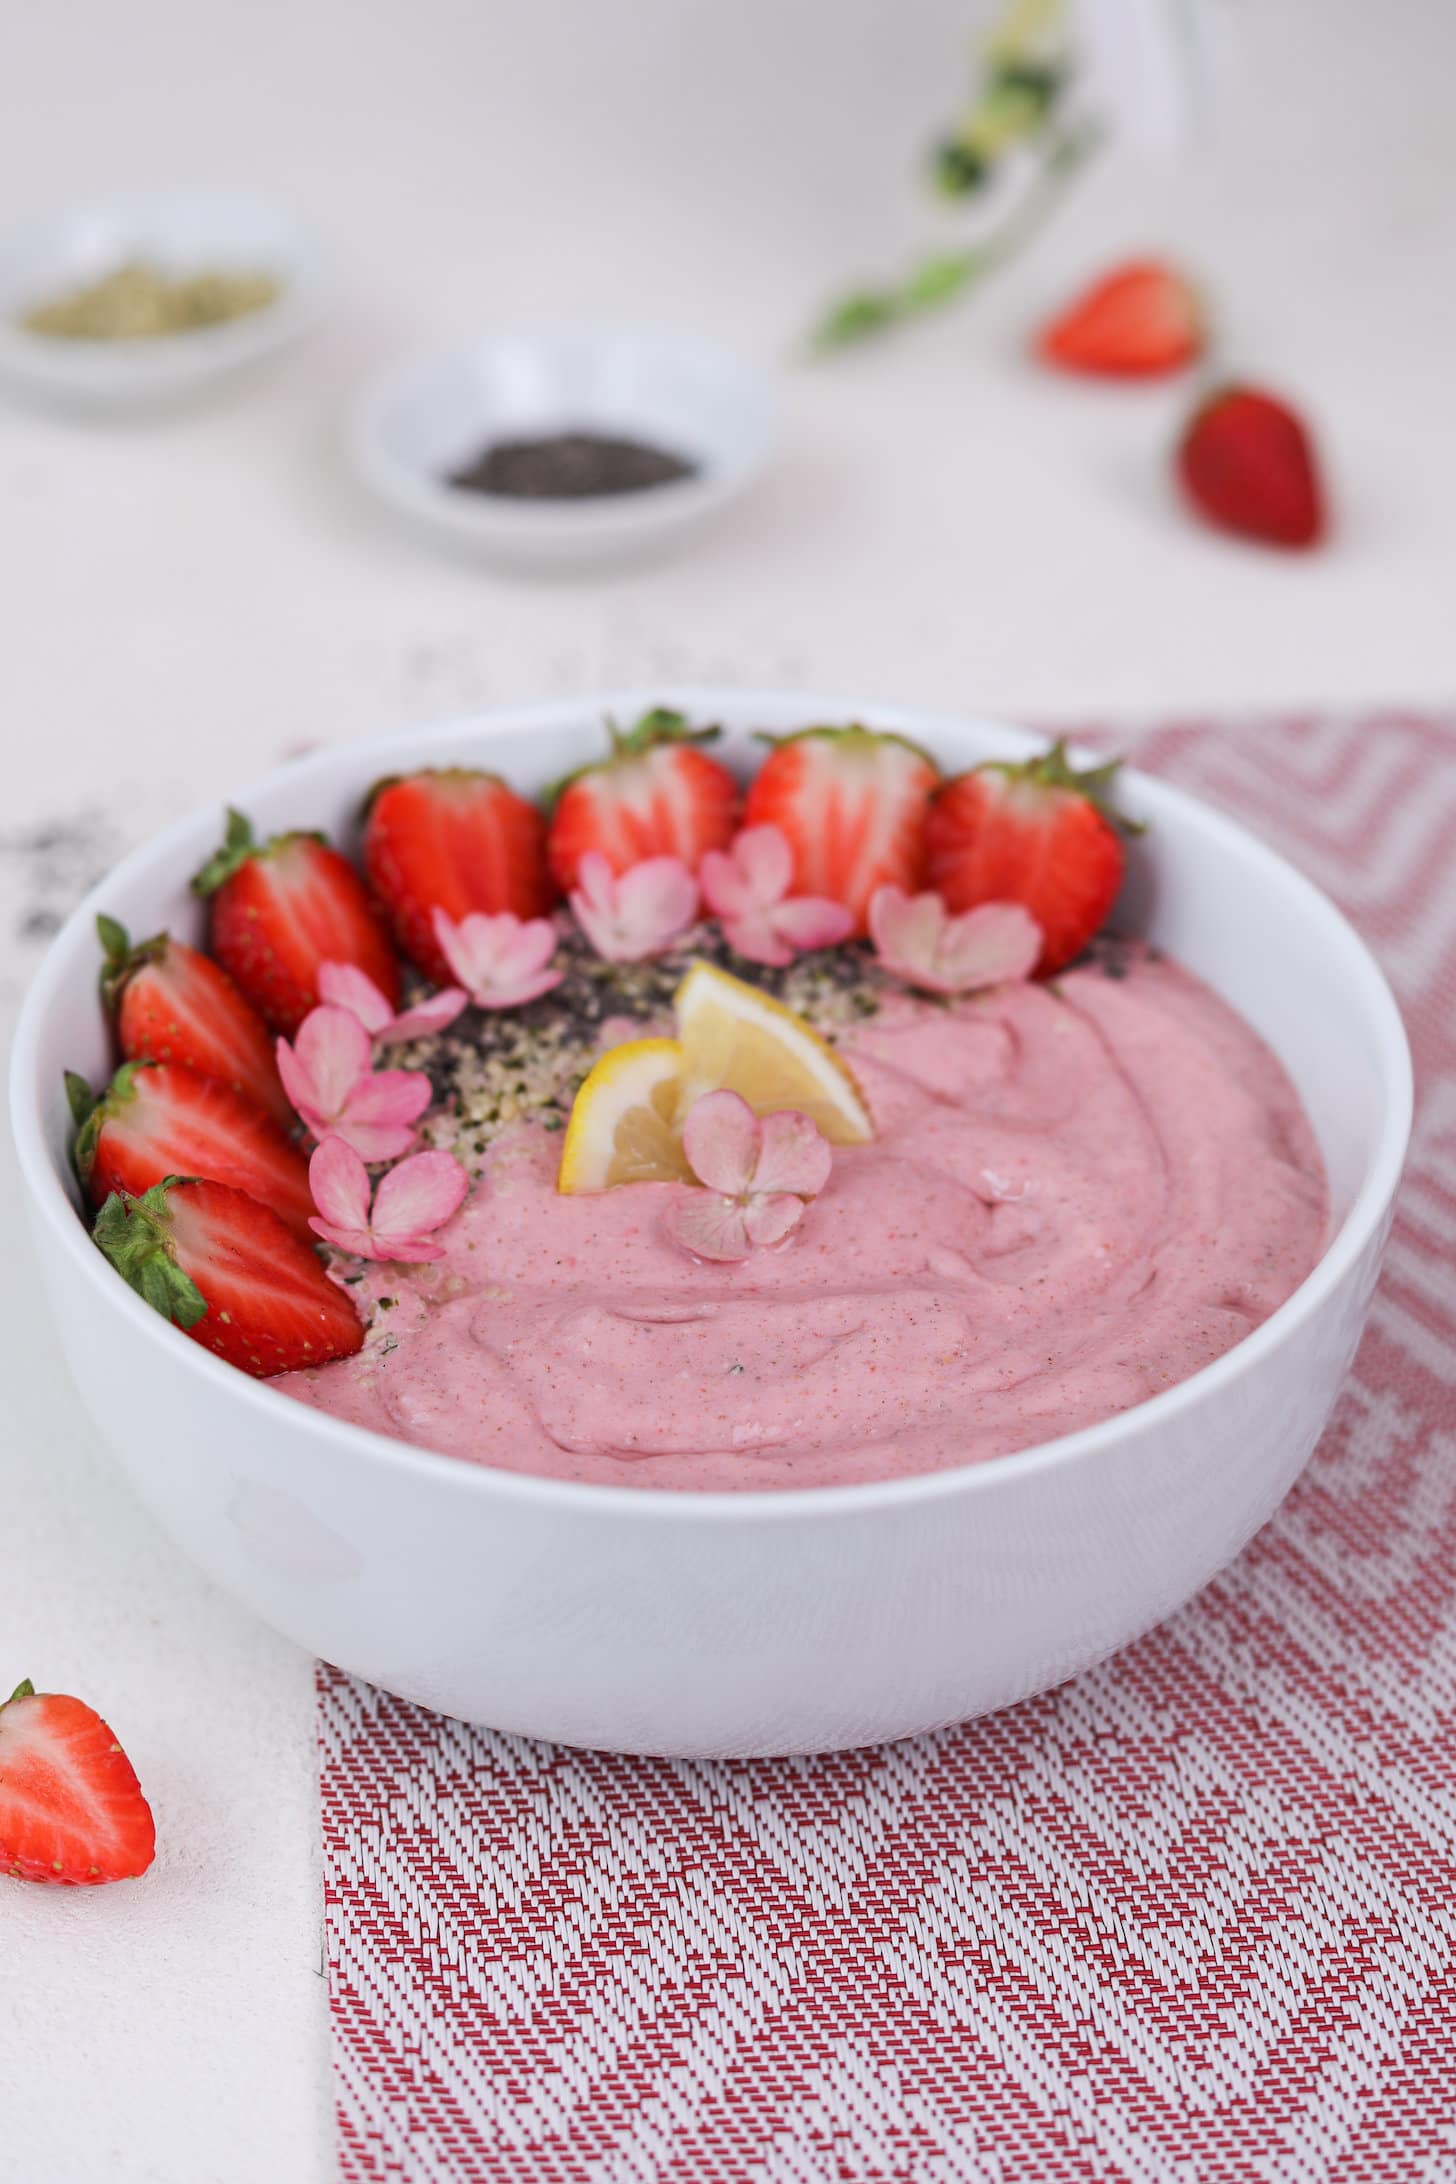 Perspective image of a pink smoothie topped with strawberry halves, lemon segments and pink flowers.